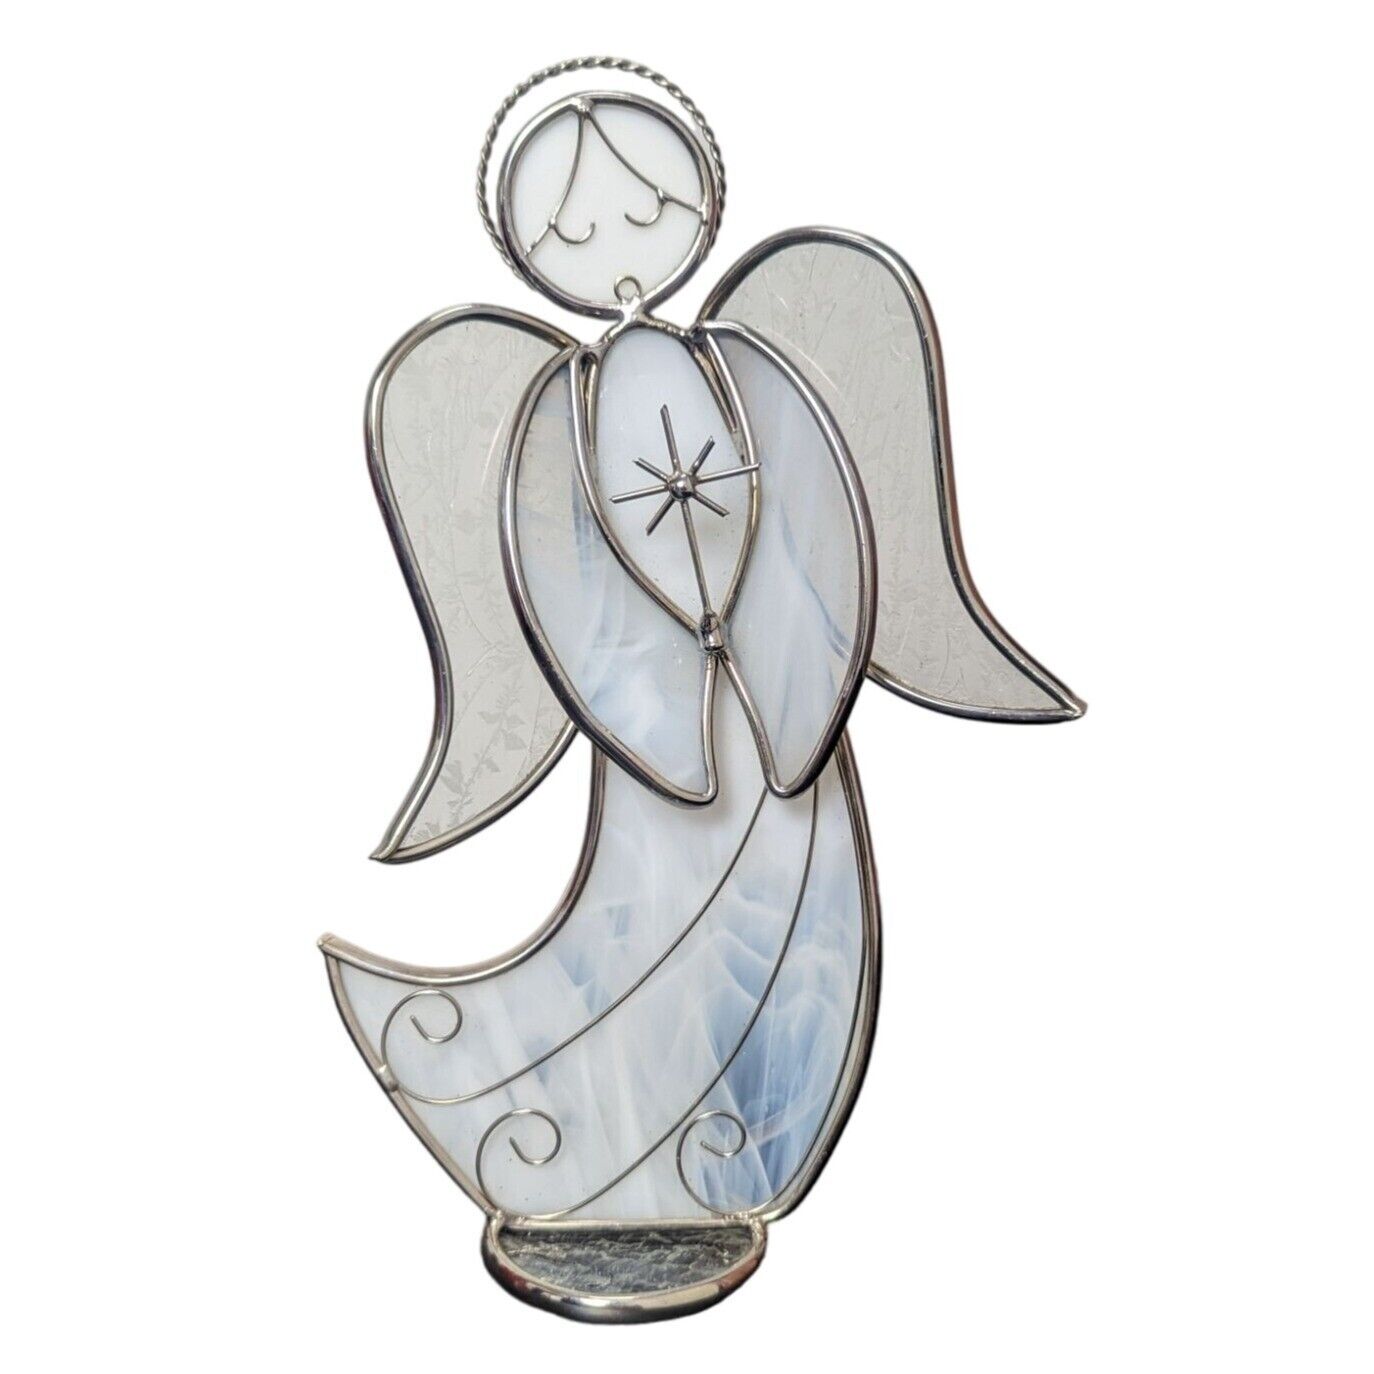 Vintage Handcrafted Leaded Stained-Glass White Angel -10 Inches - Free Standing